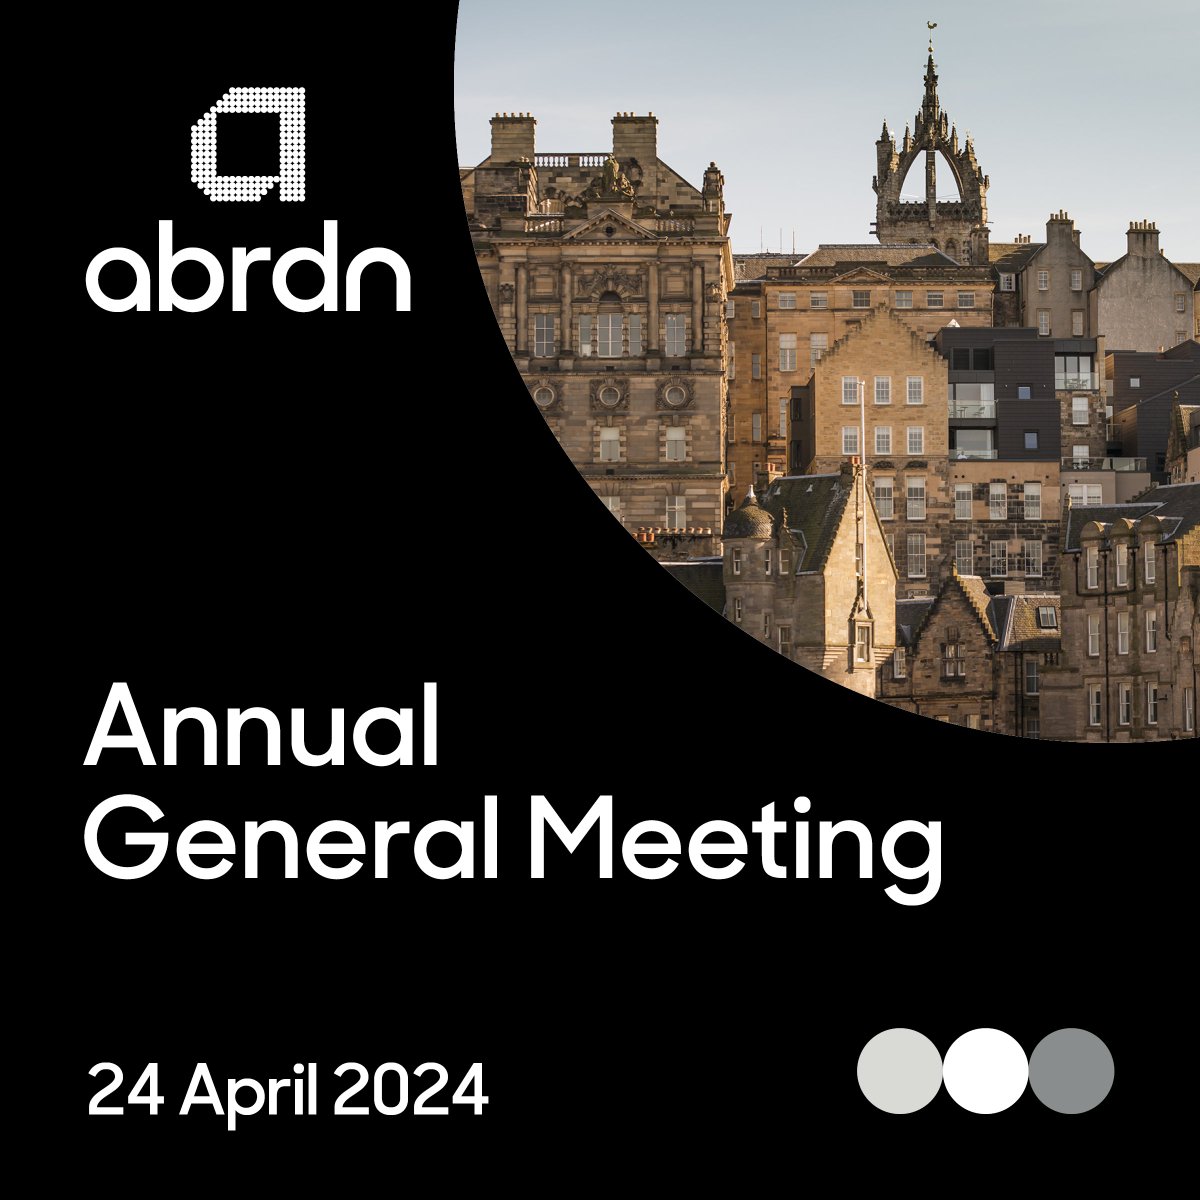 Our AGM will be held on Wednesday 24 April 2024 at 2pm (UK time) in Edinburgh. Shareholders can attend the meeting in person or join online. Further details, including our AGM Guide, can be found on our website: ow.ly/QJ4550QXvkh